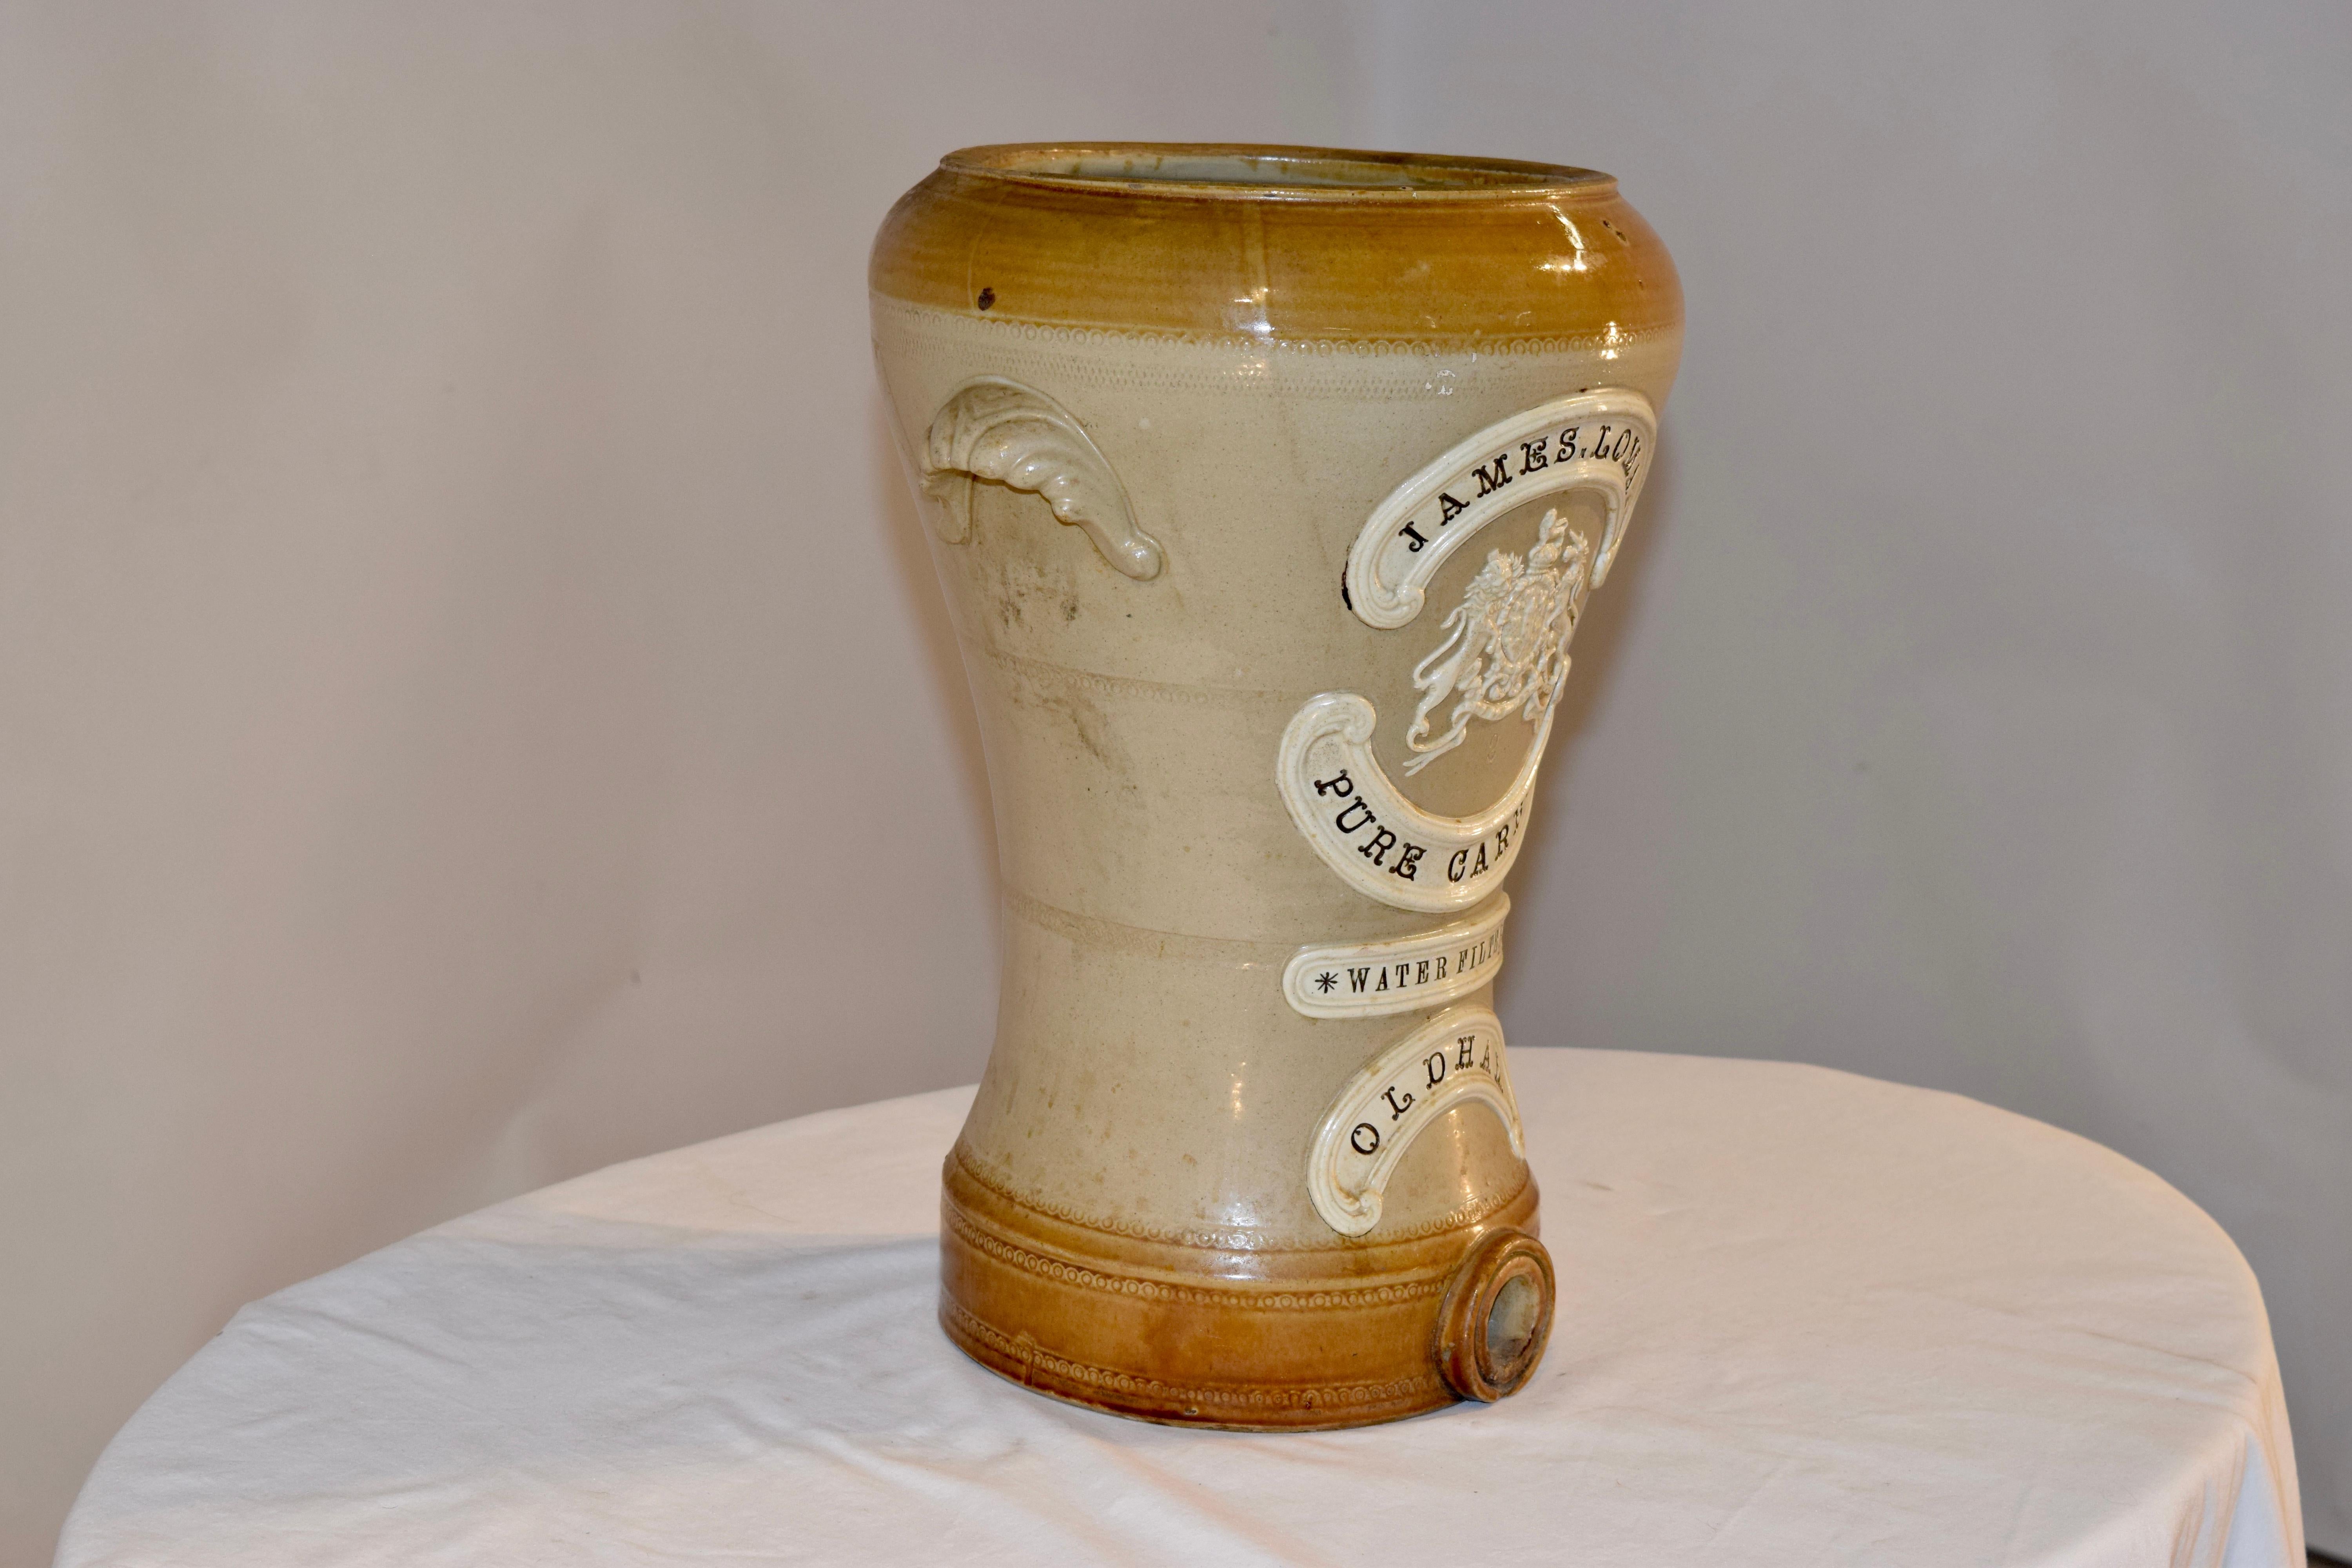 Victorian pure carbon water filter by James Lomas of Oldham. It is made of stoneware and has applied banners with the name James Lomas pure carbon water filter and the town name of Oldham. It has applied handles on the sides and the lid is missing.